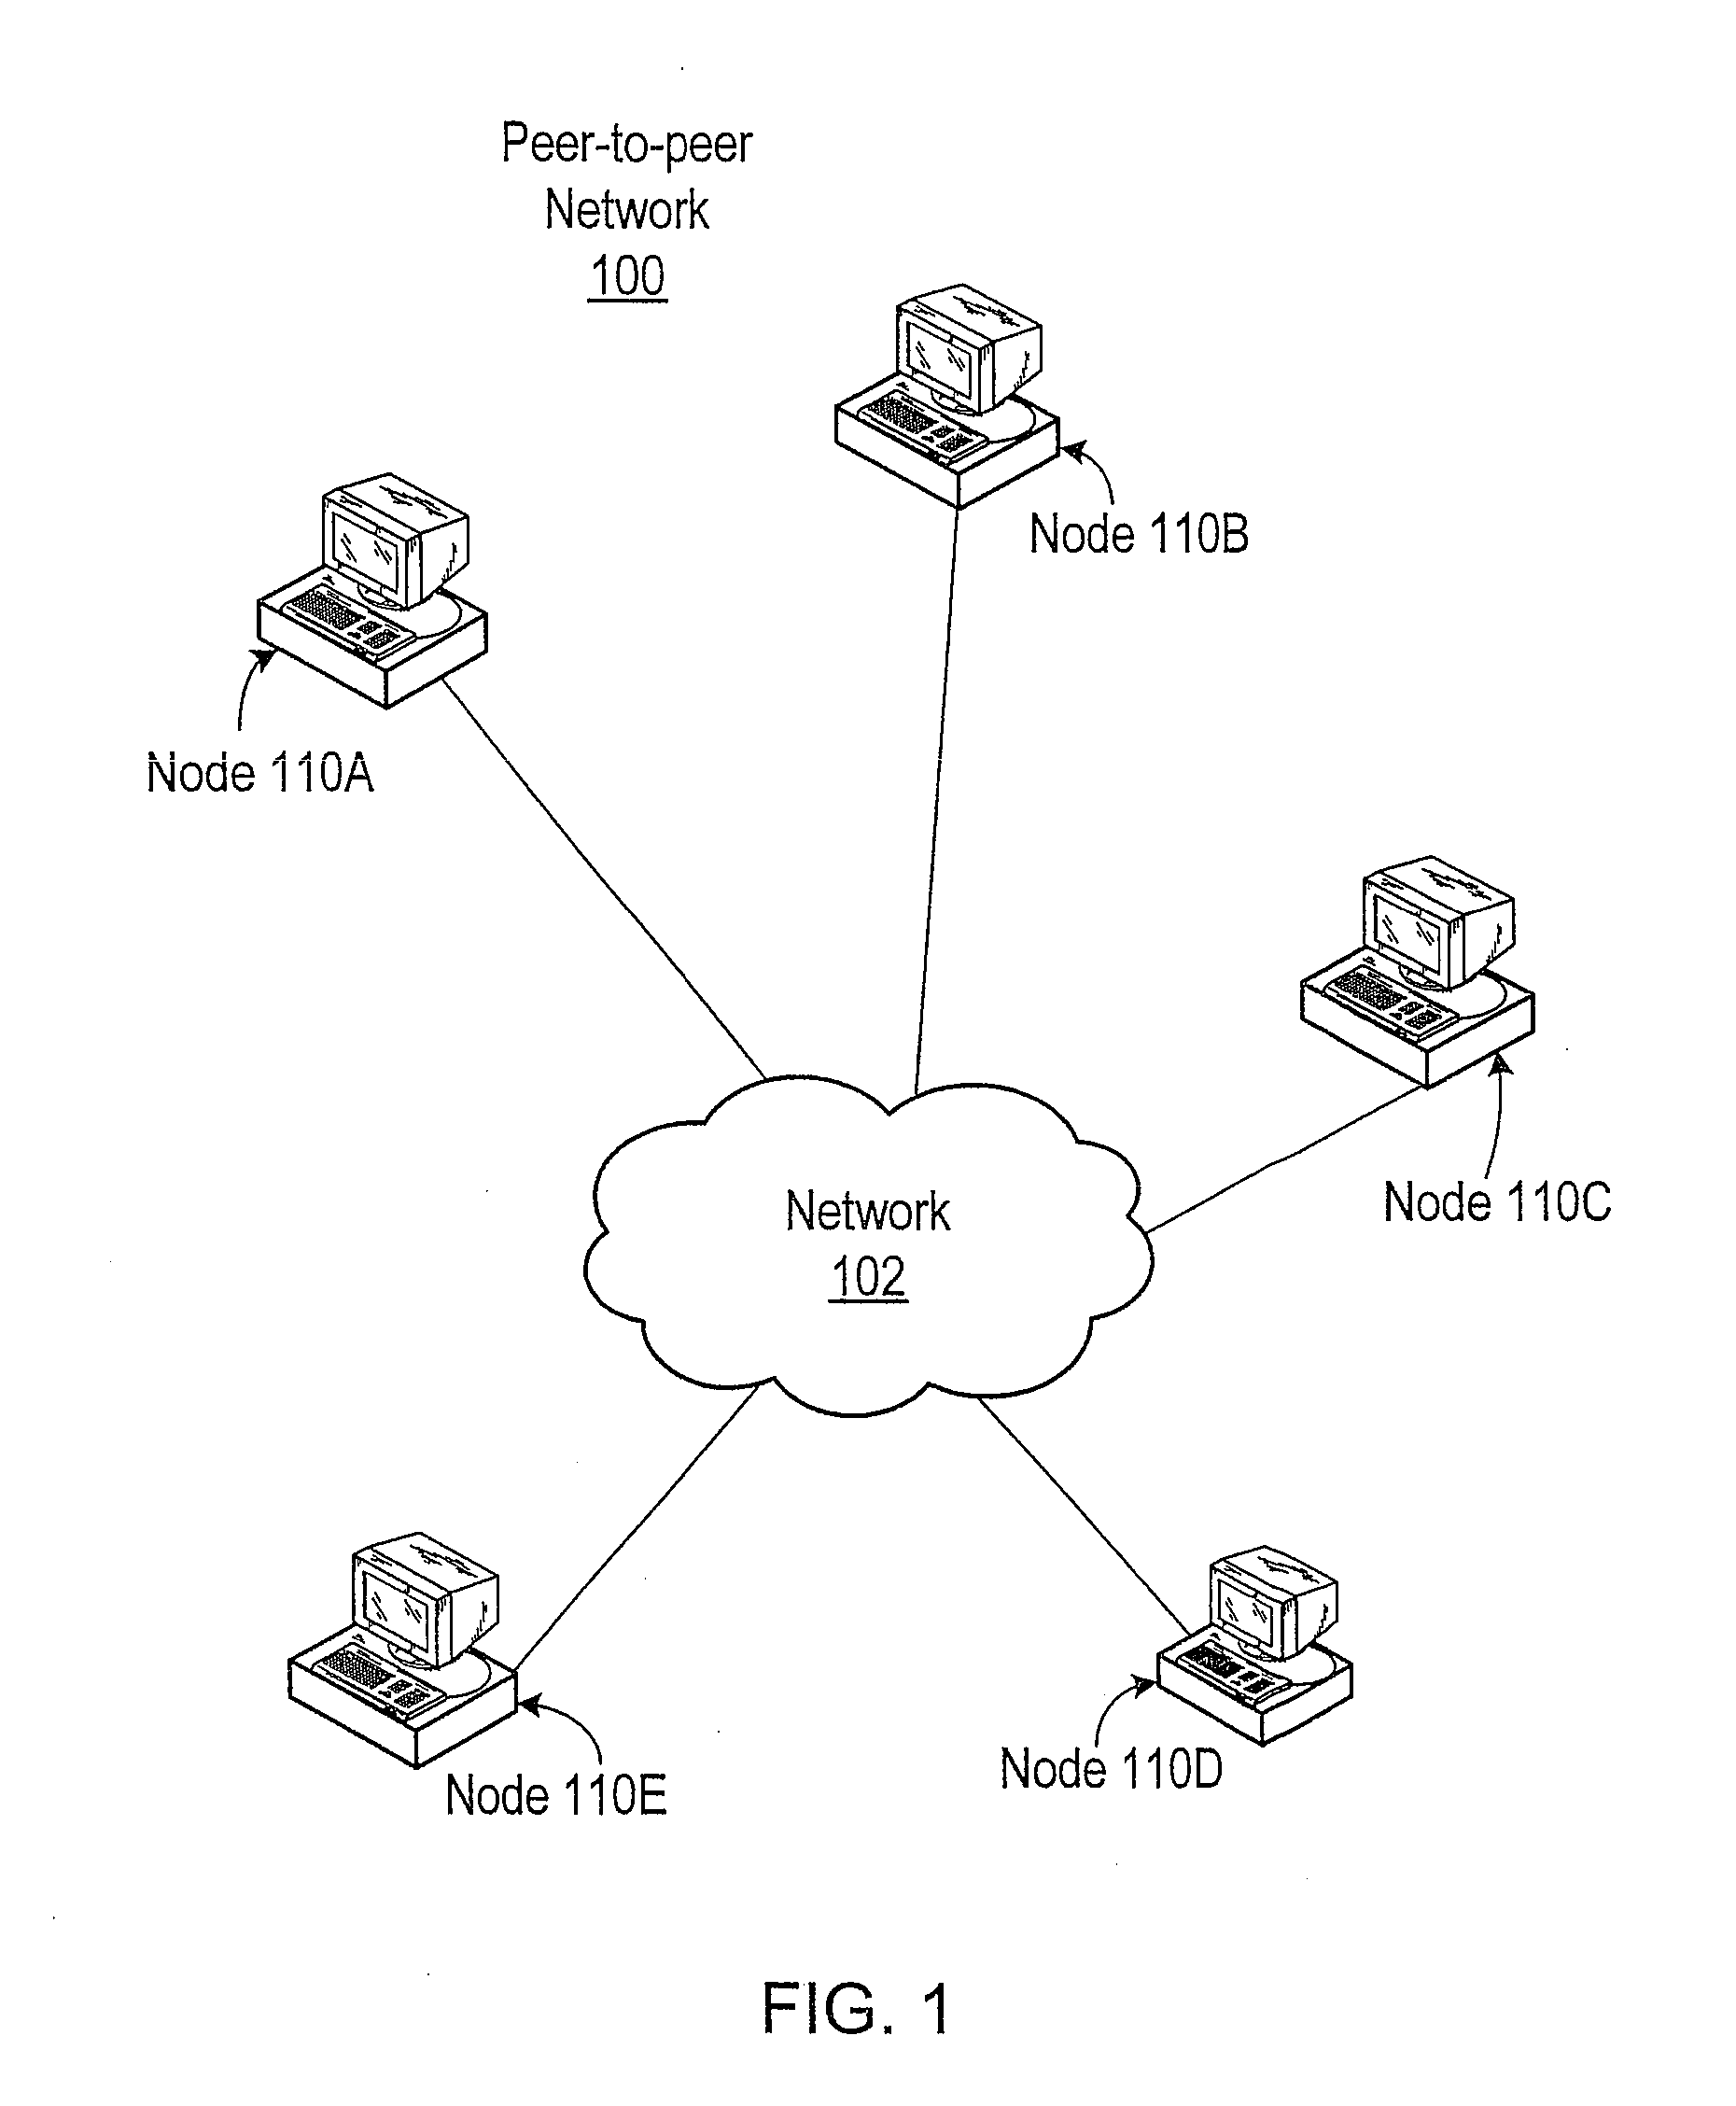 Topology and routing model for a computer network